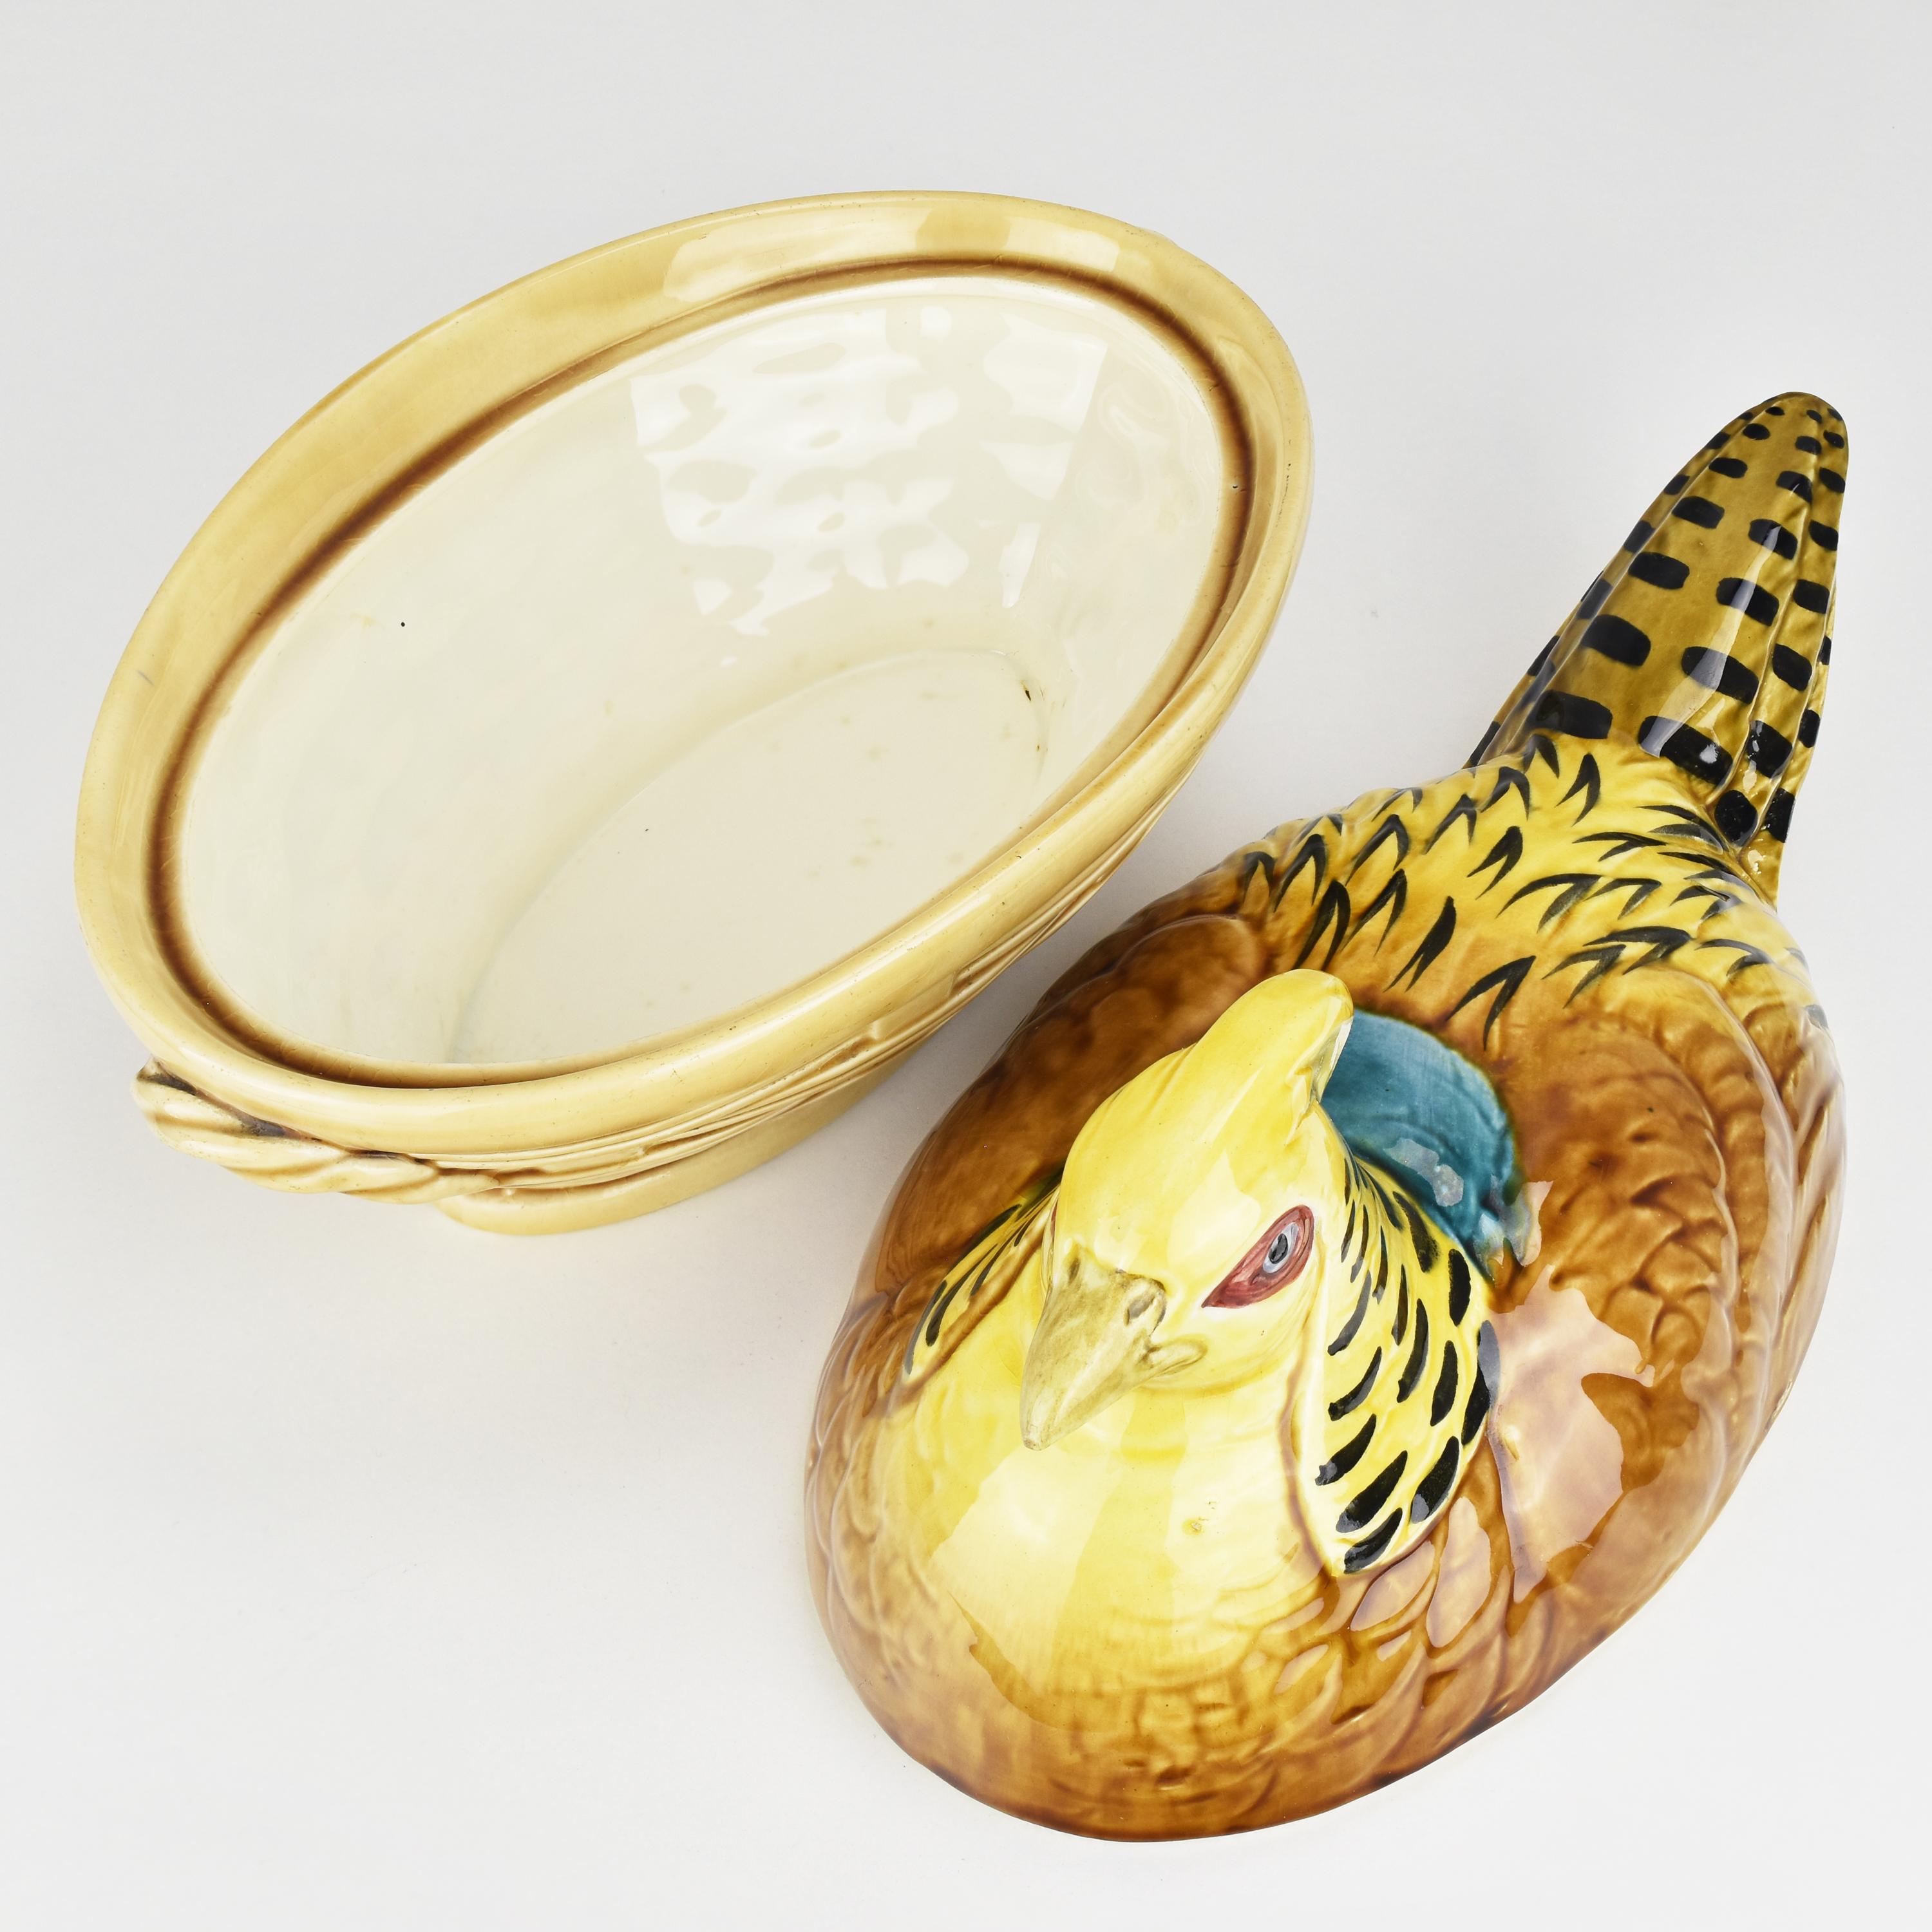 Early 20th Century Art Nouveau Majolica Barbotine Box Jar Pheasant on Basket by Sarreguemines For Sale